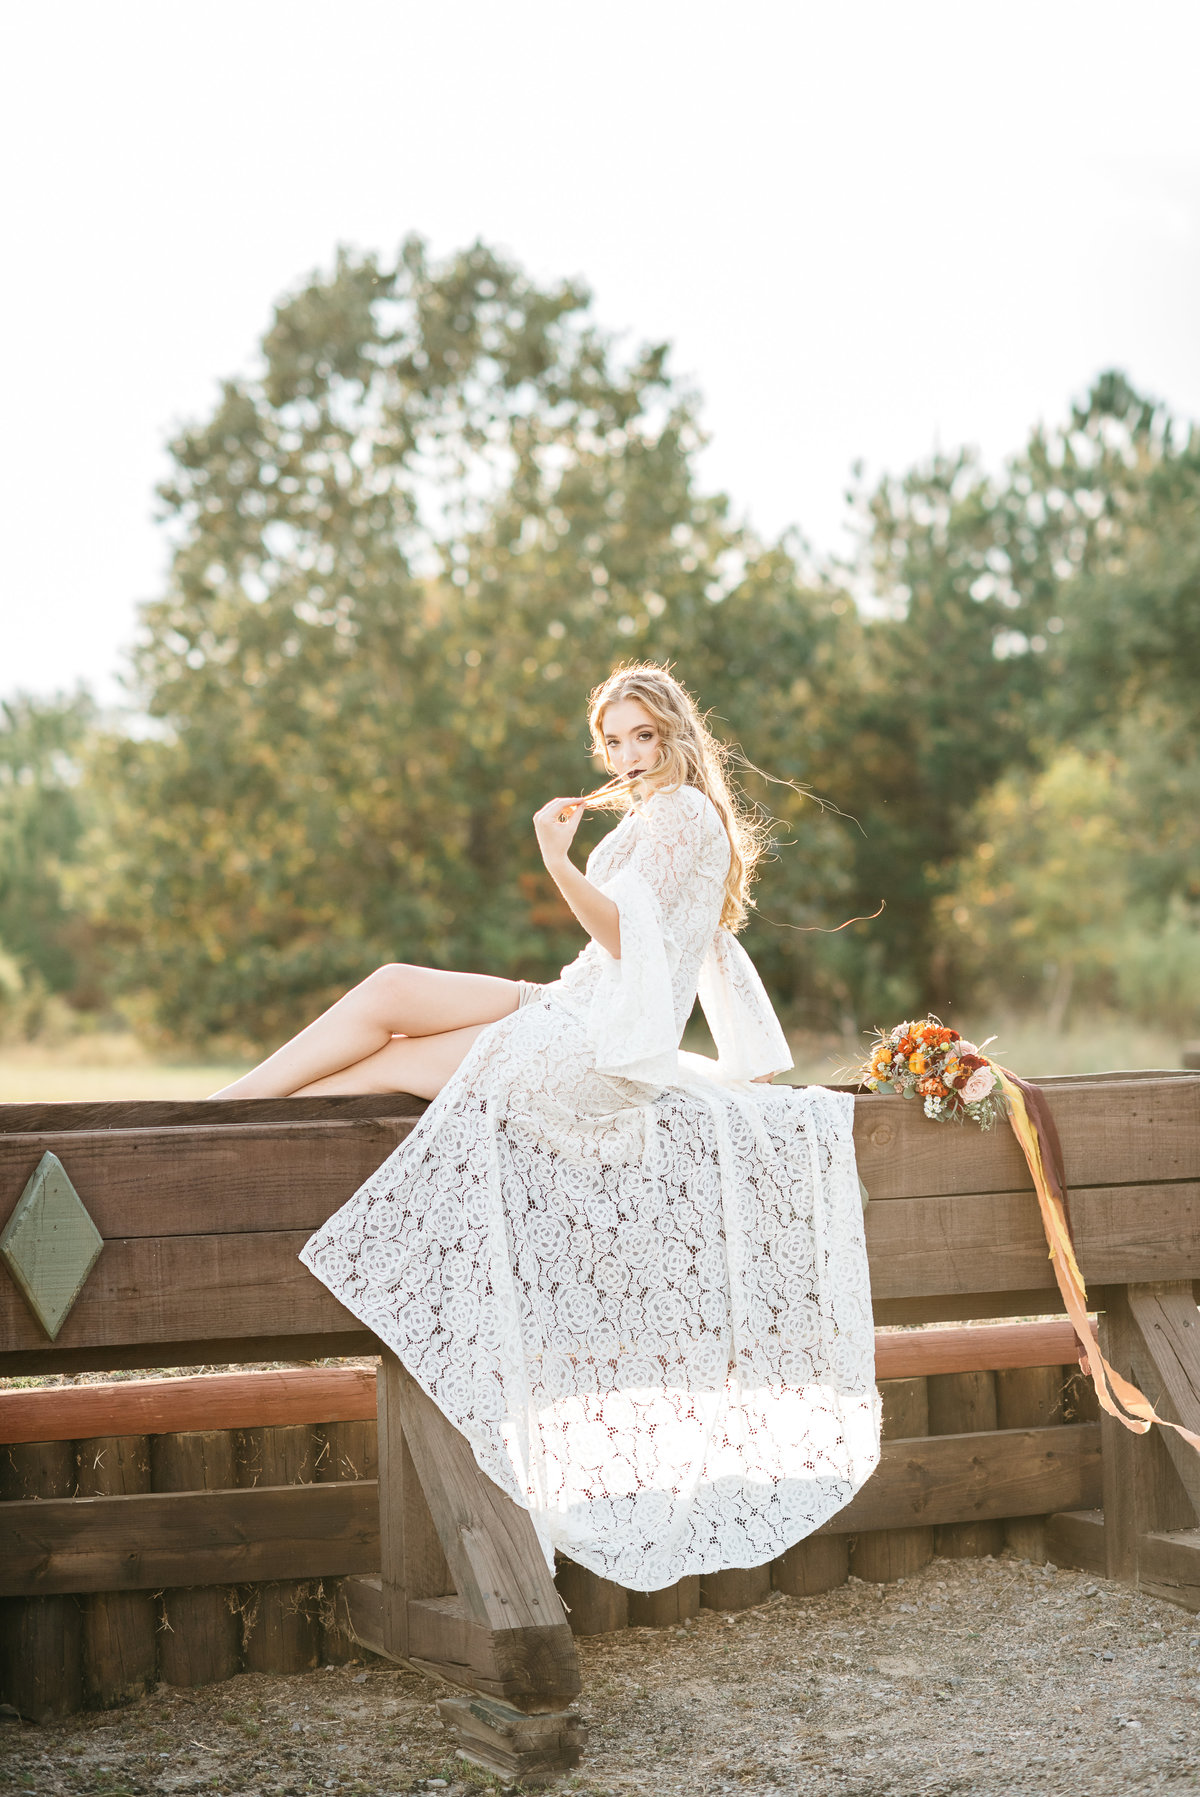 Stable View Wedding Photographer - Bride sitting on horse jump